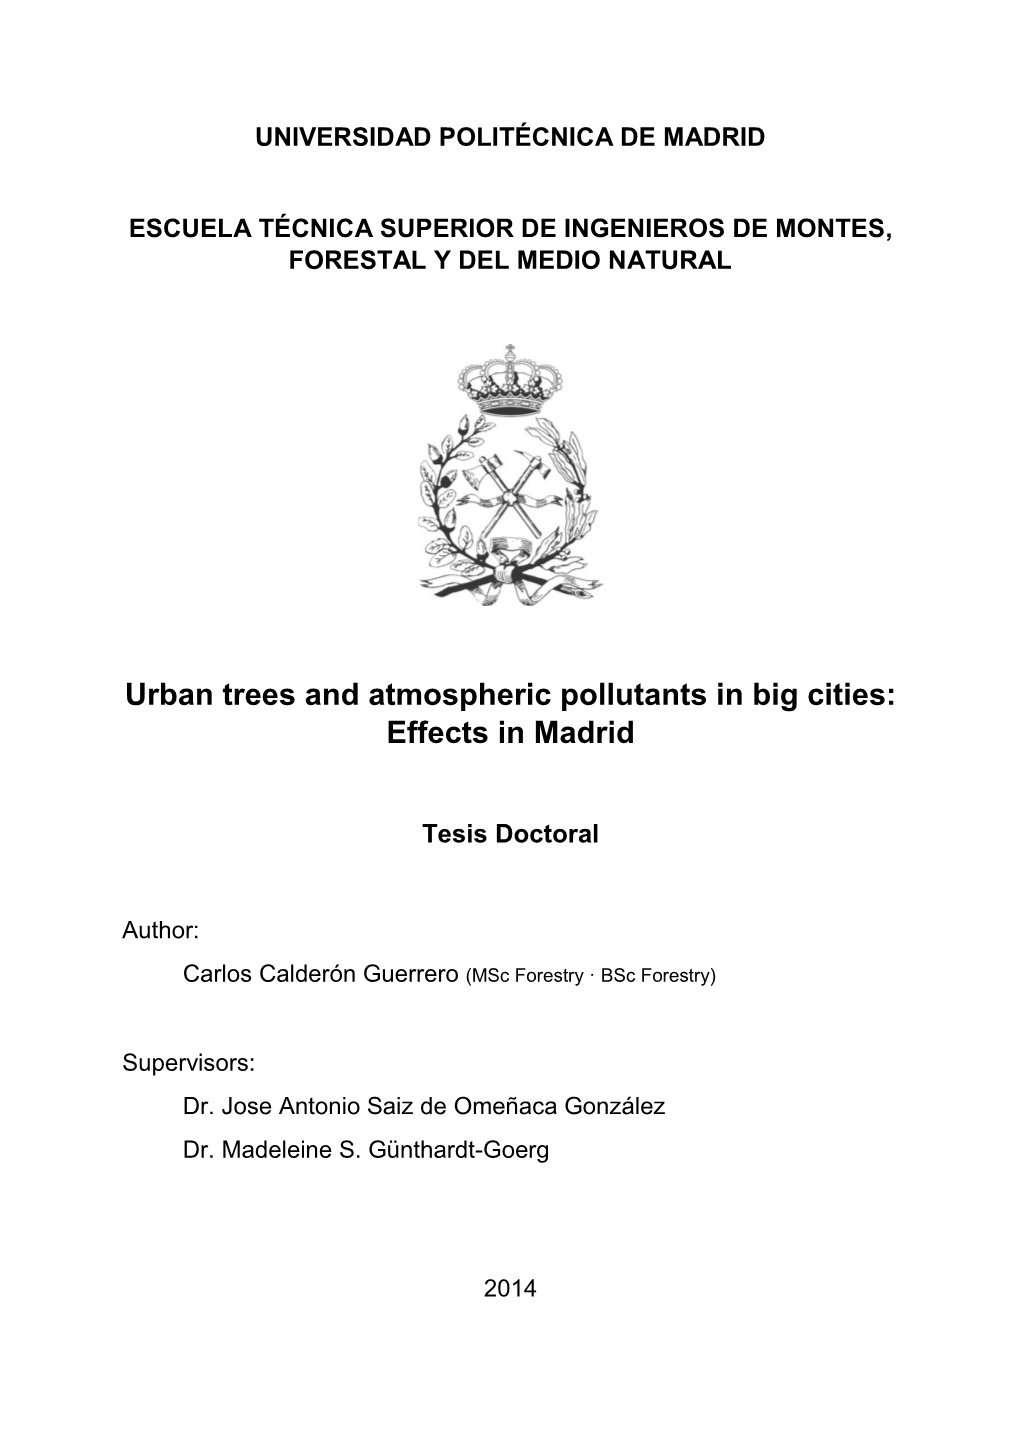 Urban Trees and Atmospheric Pollutants in Big Cities: Effects in Madrid